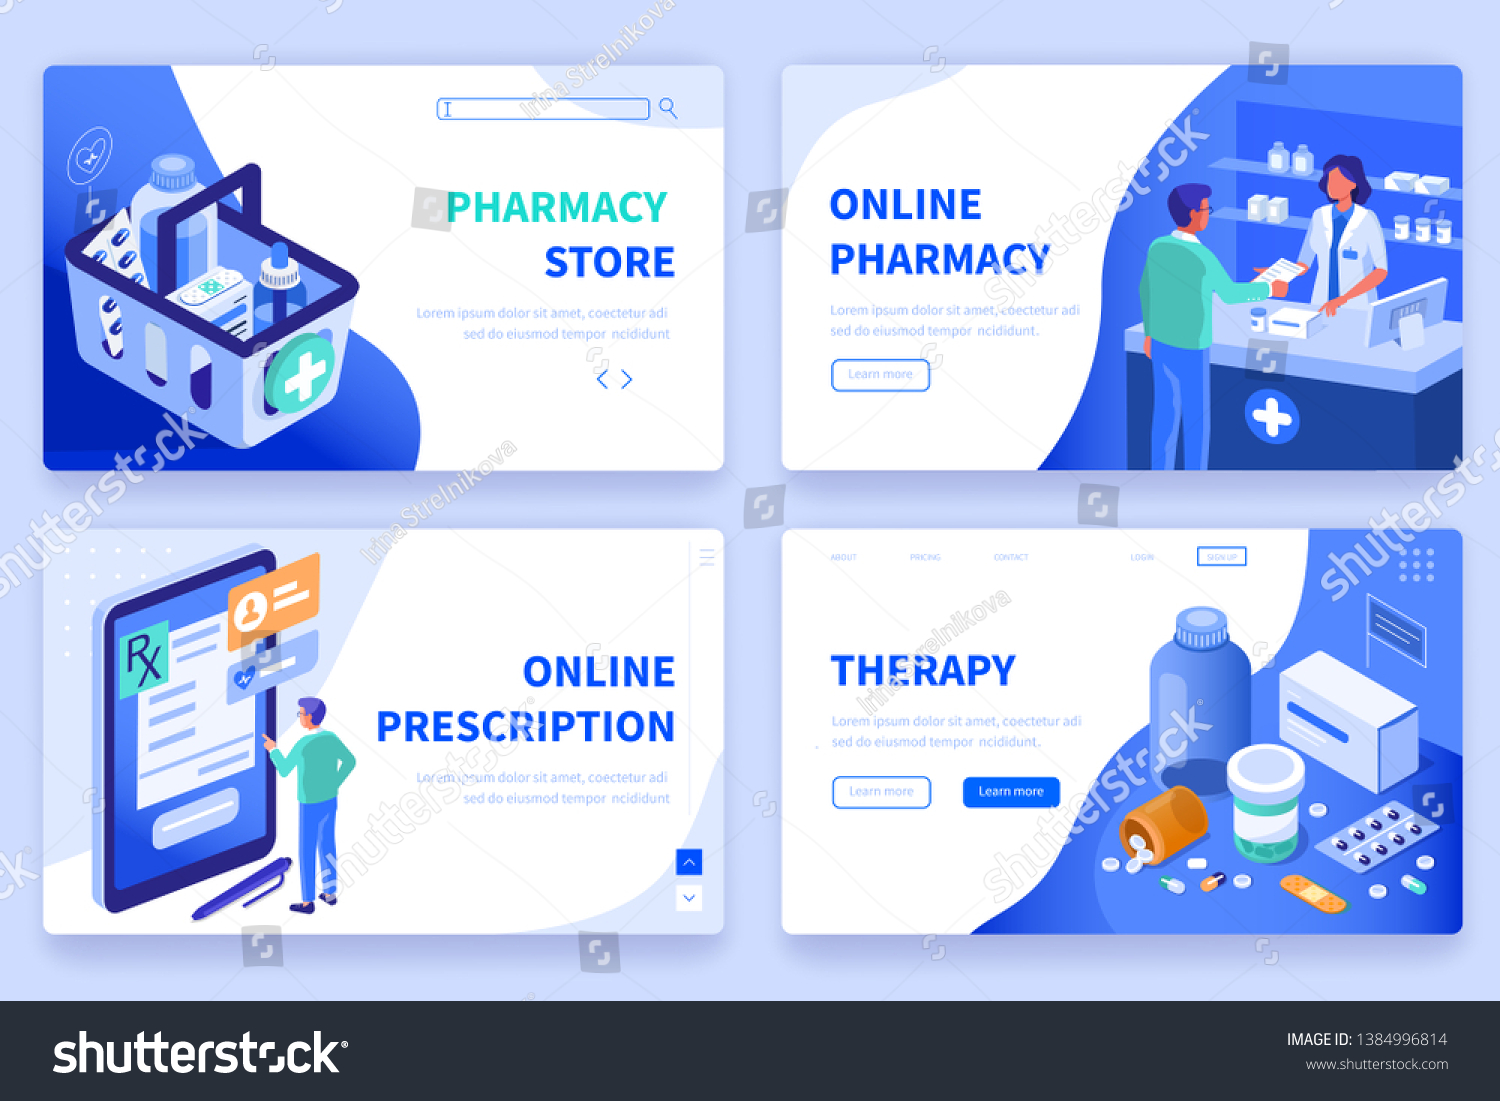 Medicine  and pharmacy banners templates. Can use for backgrounds, infographics, hero images. Flat isometric modern vector illustration. #1384996814